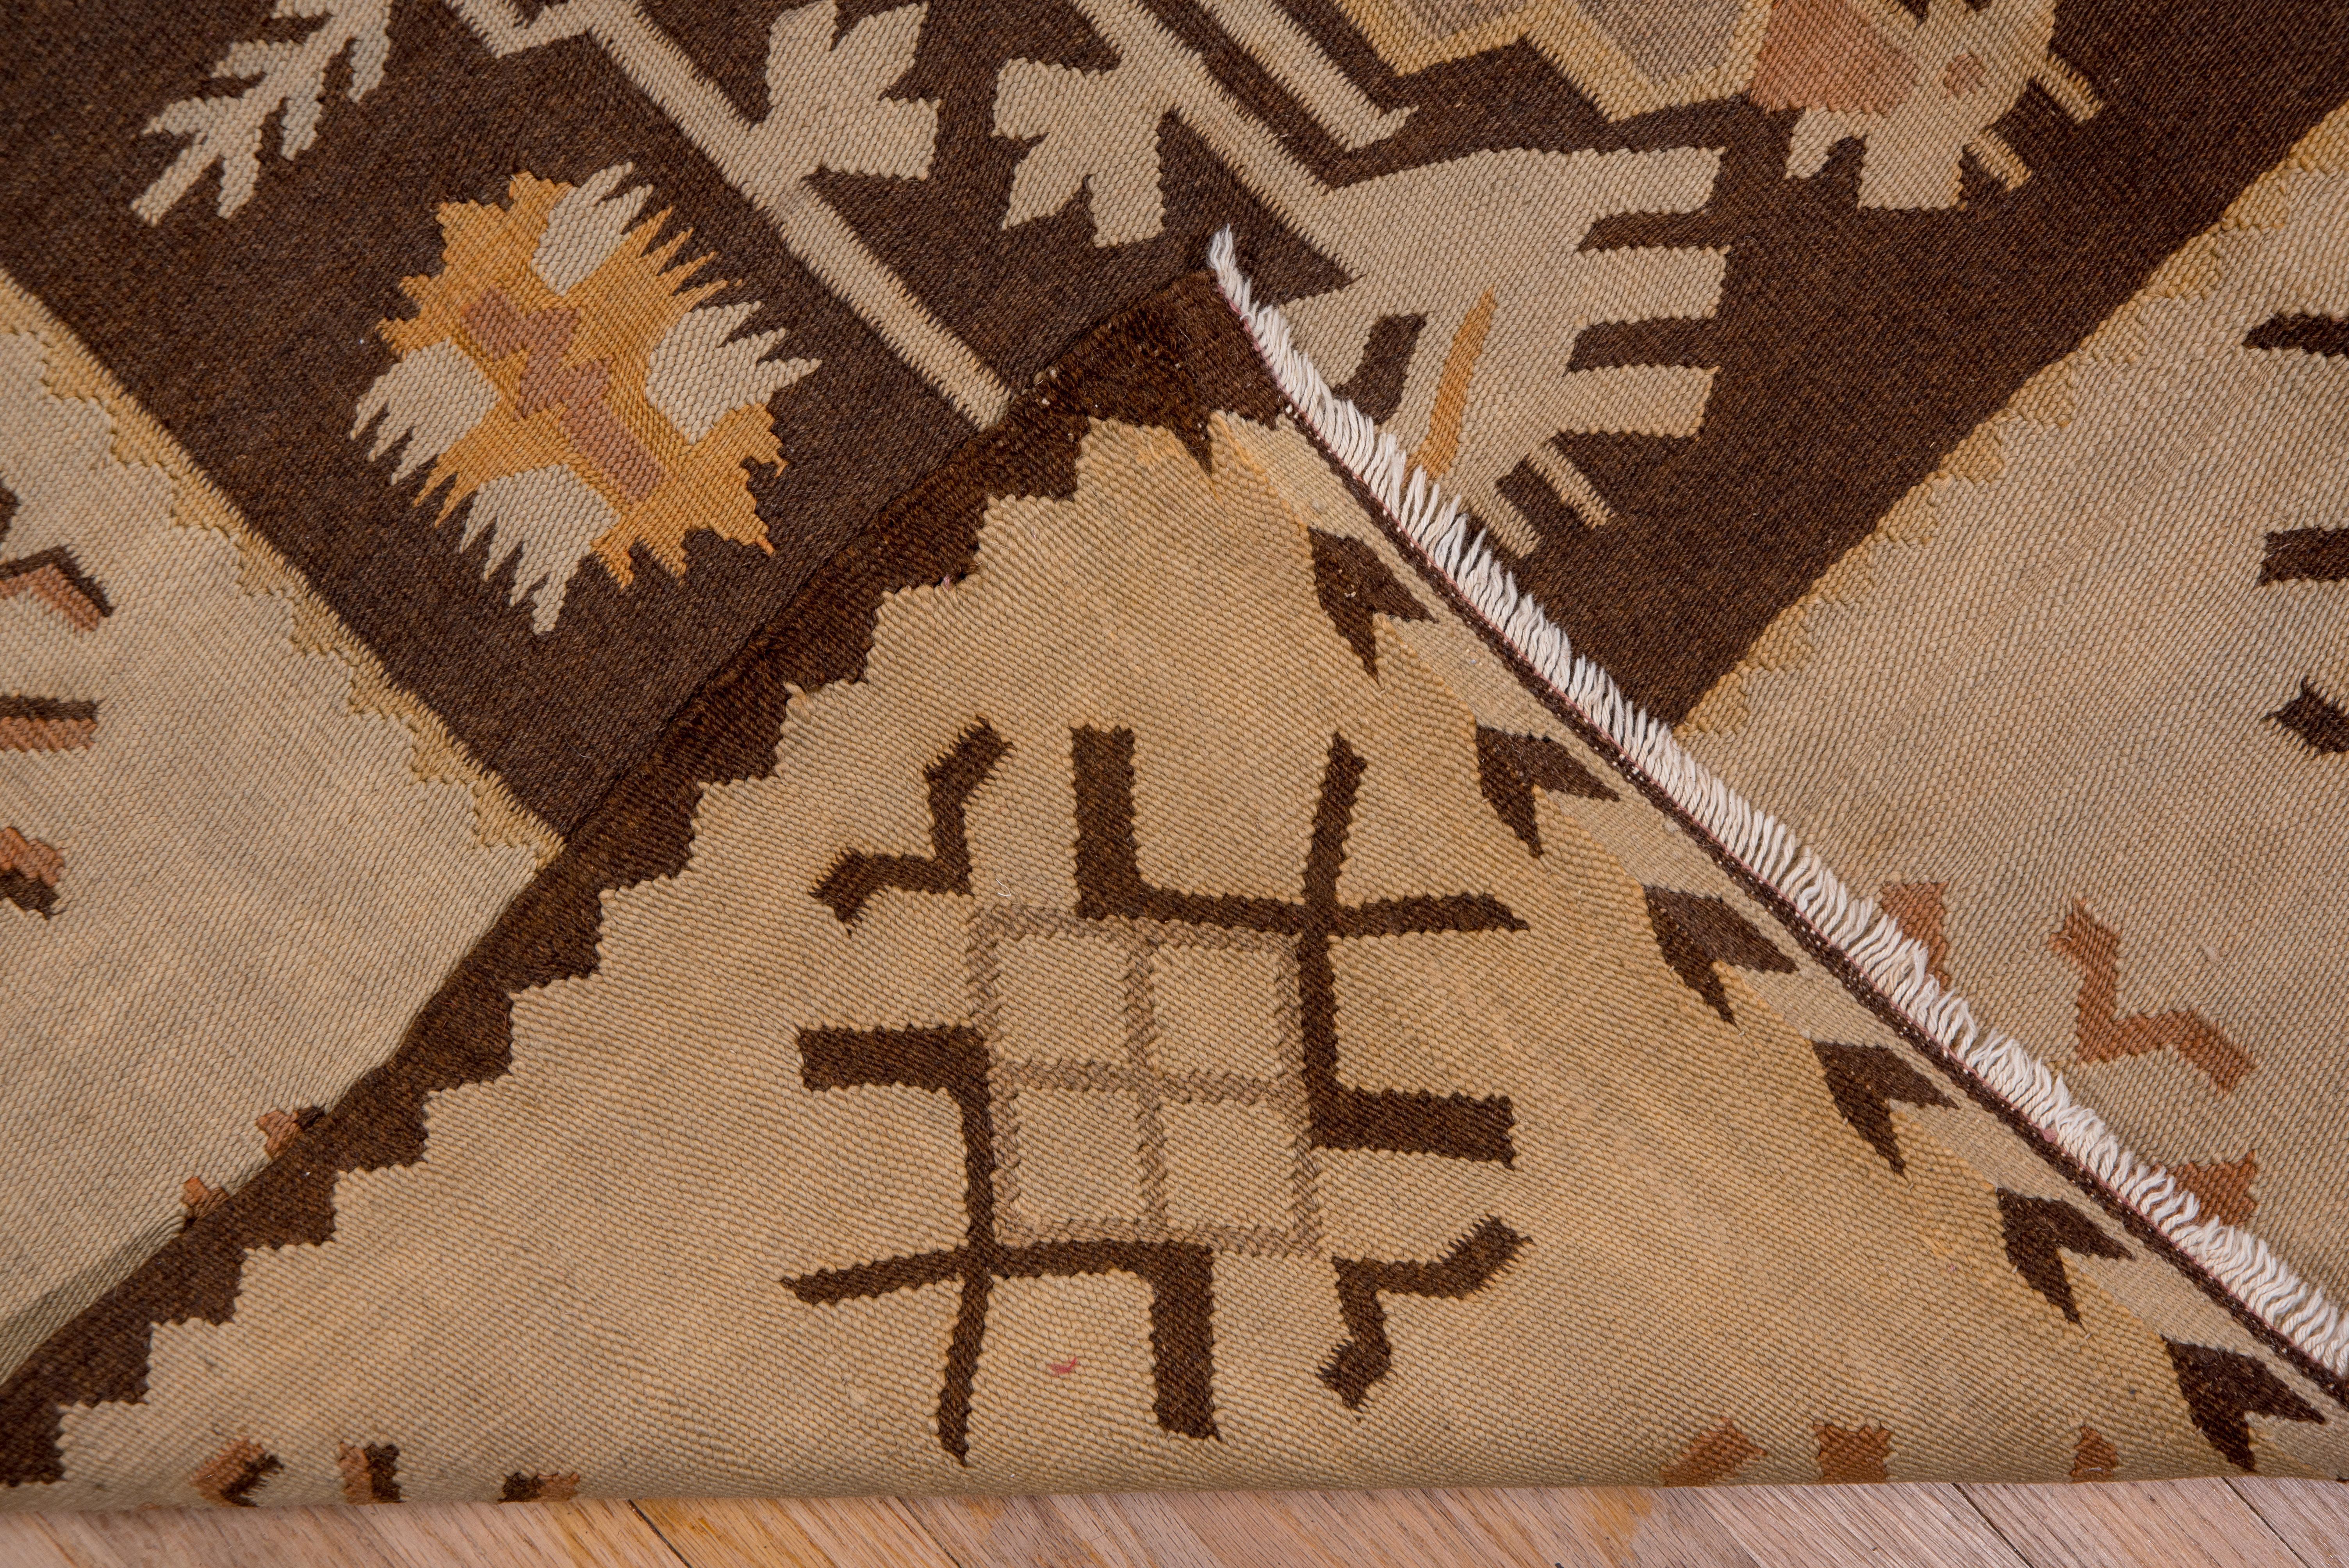 1920s Antique Turkish Kilim Rug, Allover Brown Field, Cream Borders In Good Condition For Sale In New York, NY